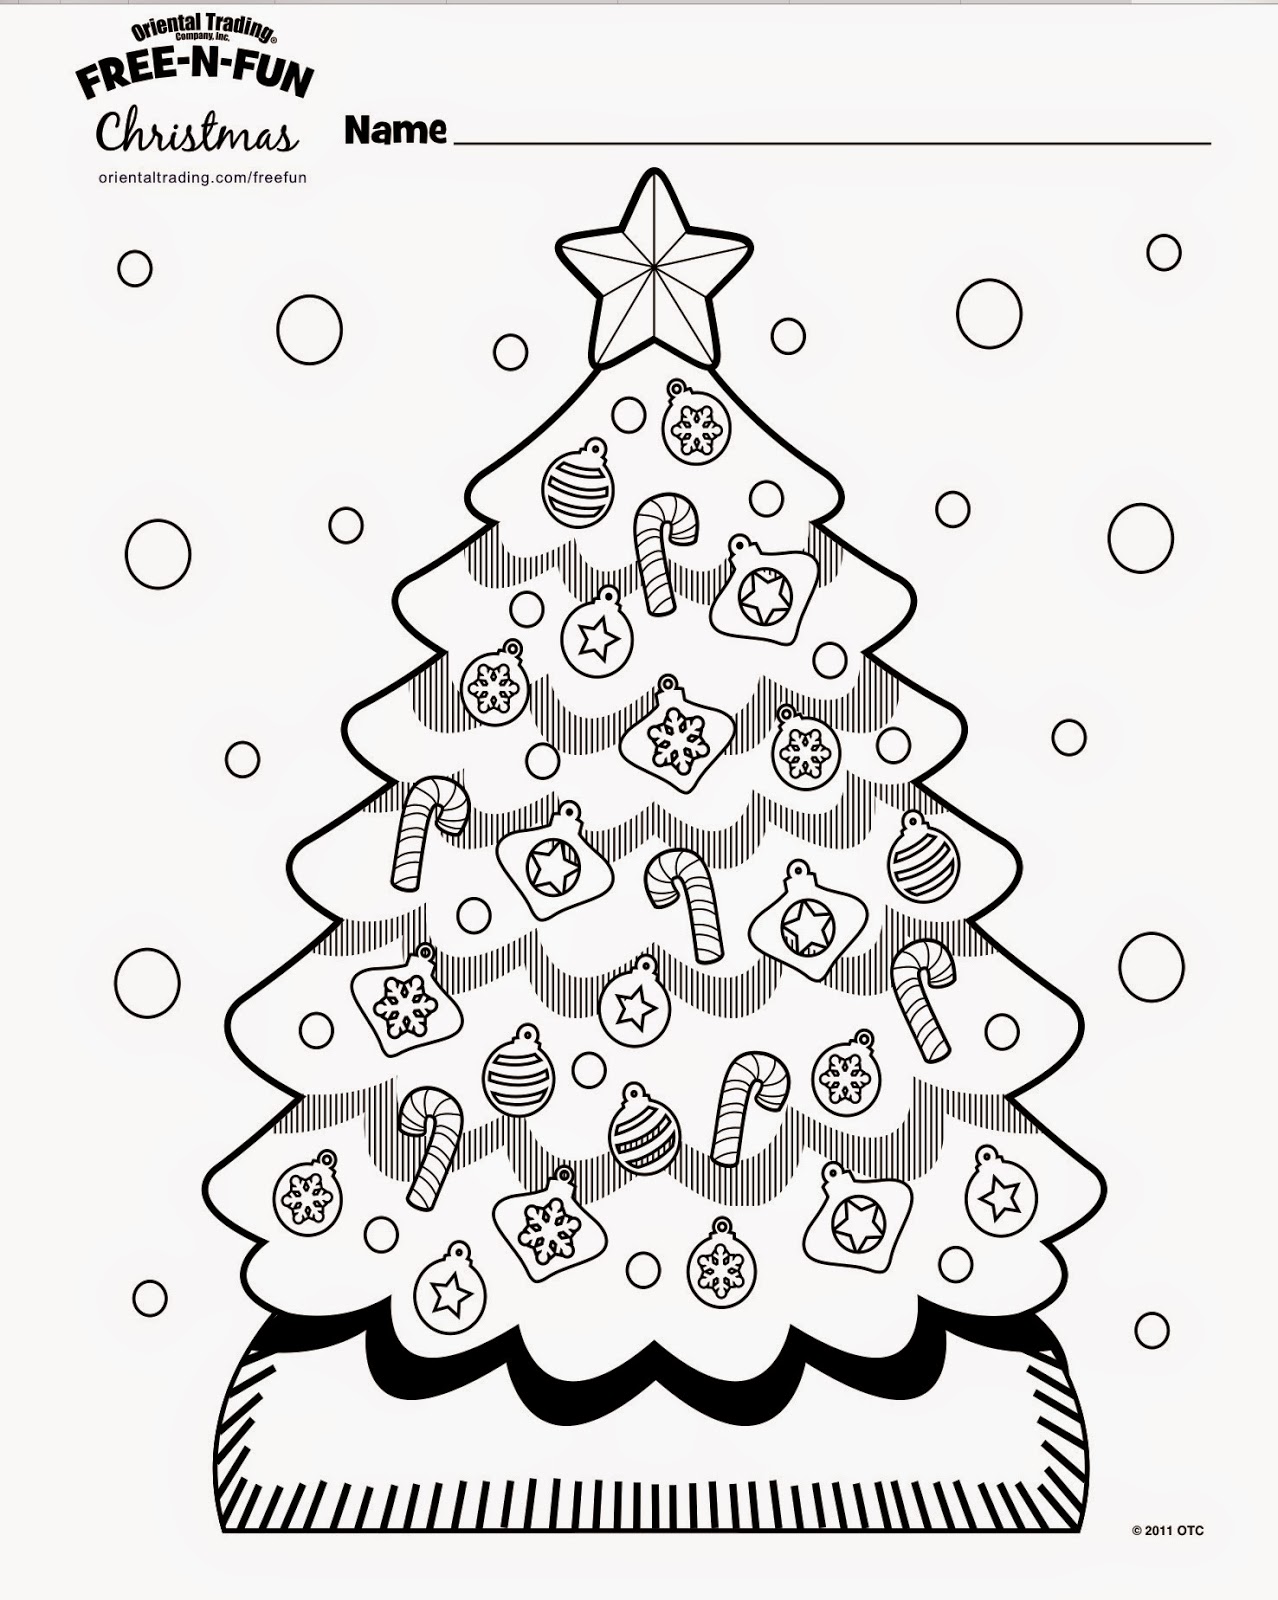 Coloring Sheets from FREE N FUN Christmas